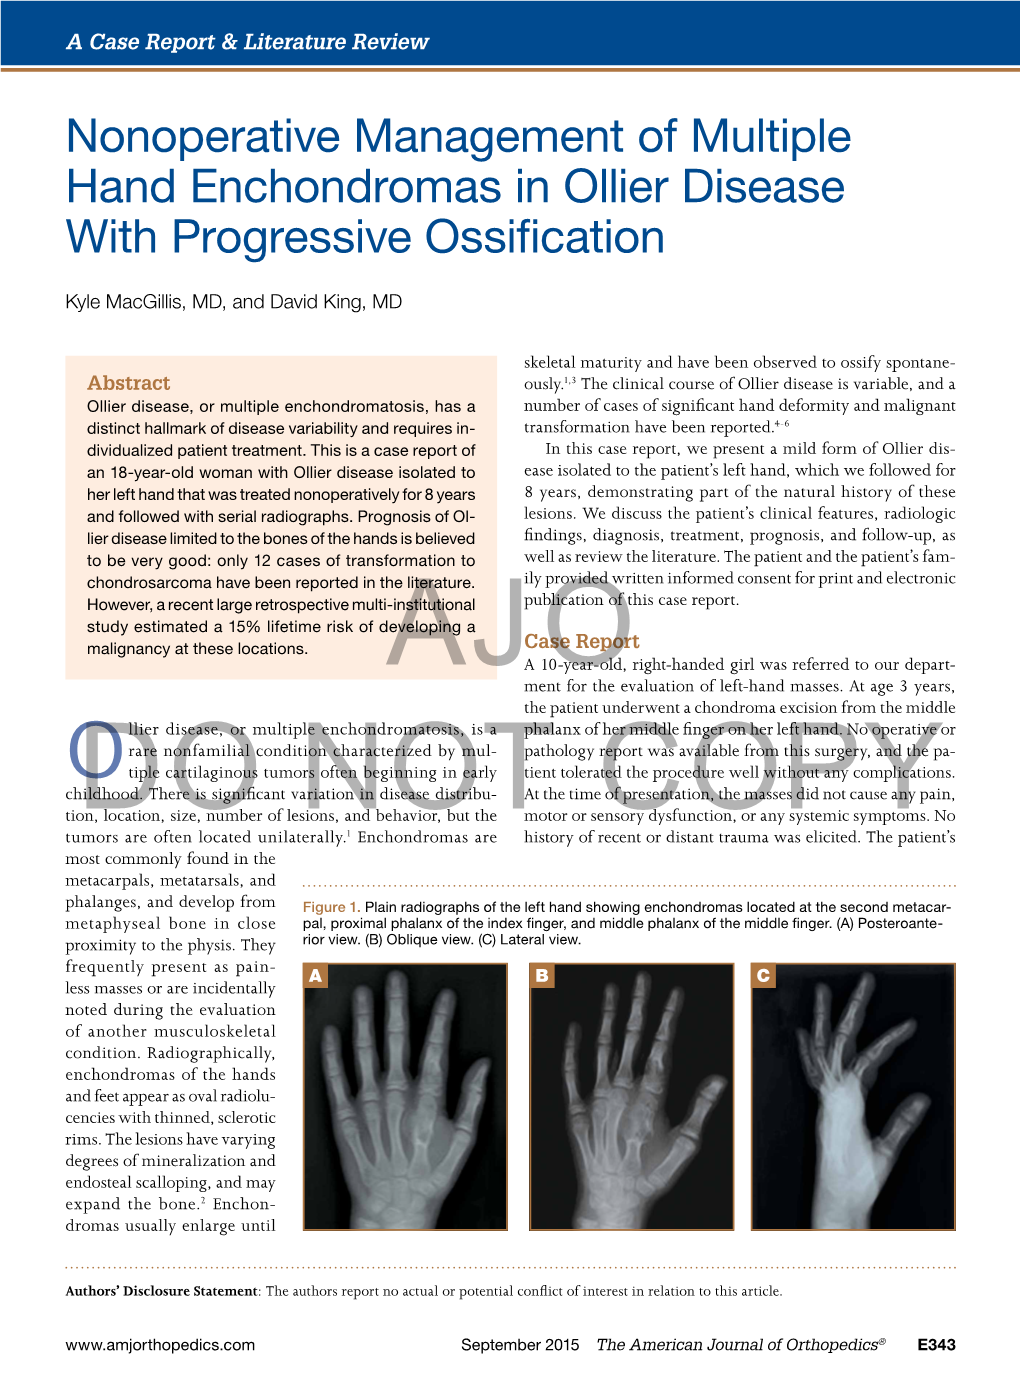 Nonoperative Management of Multiple Hand Enchondromas in Ollier Disease with Progressive Ossification